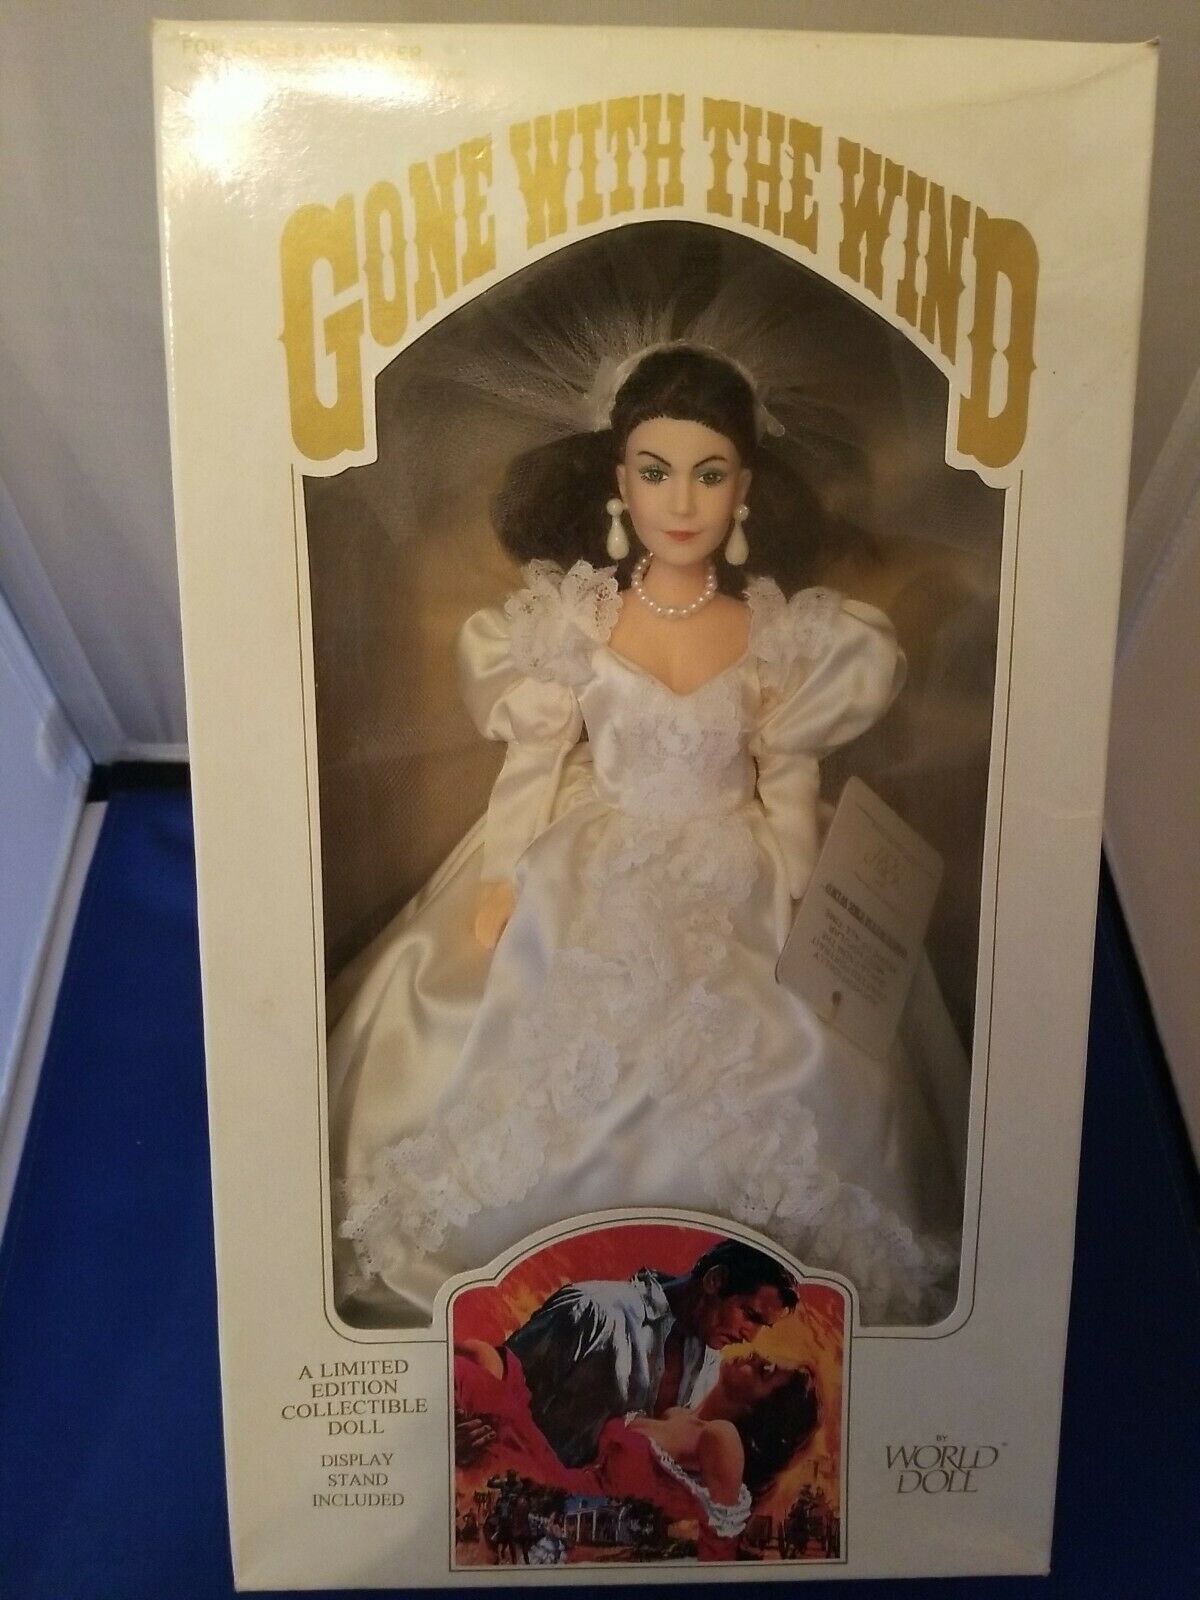 Vintage Gone With The Wind Limited Edition Collectible World Doll 71164 1989 (j)